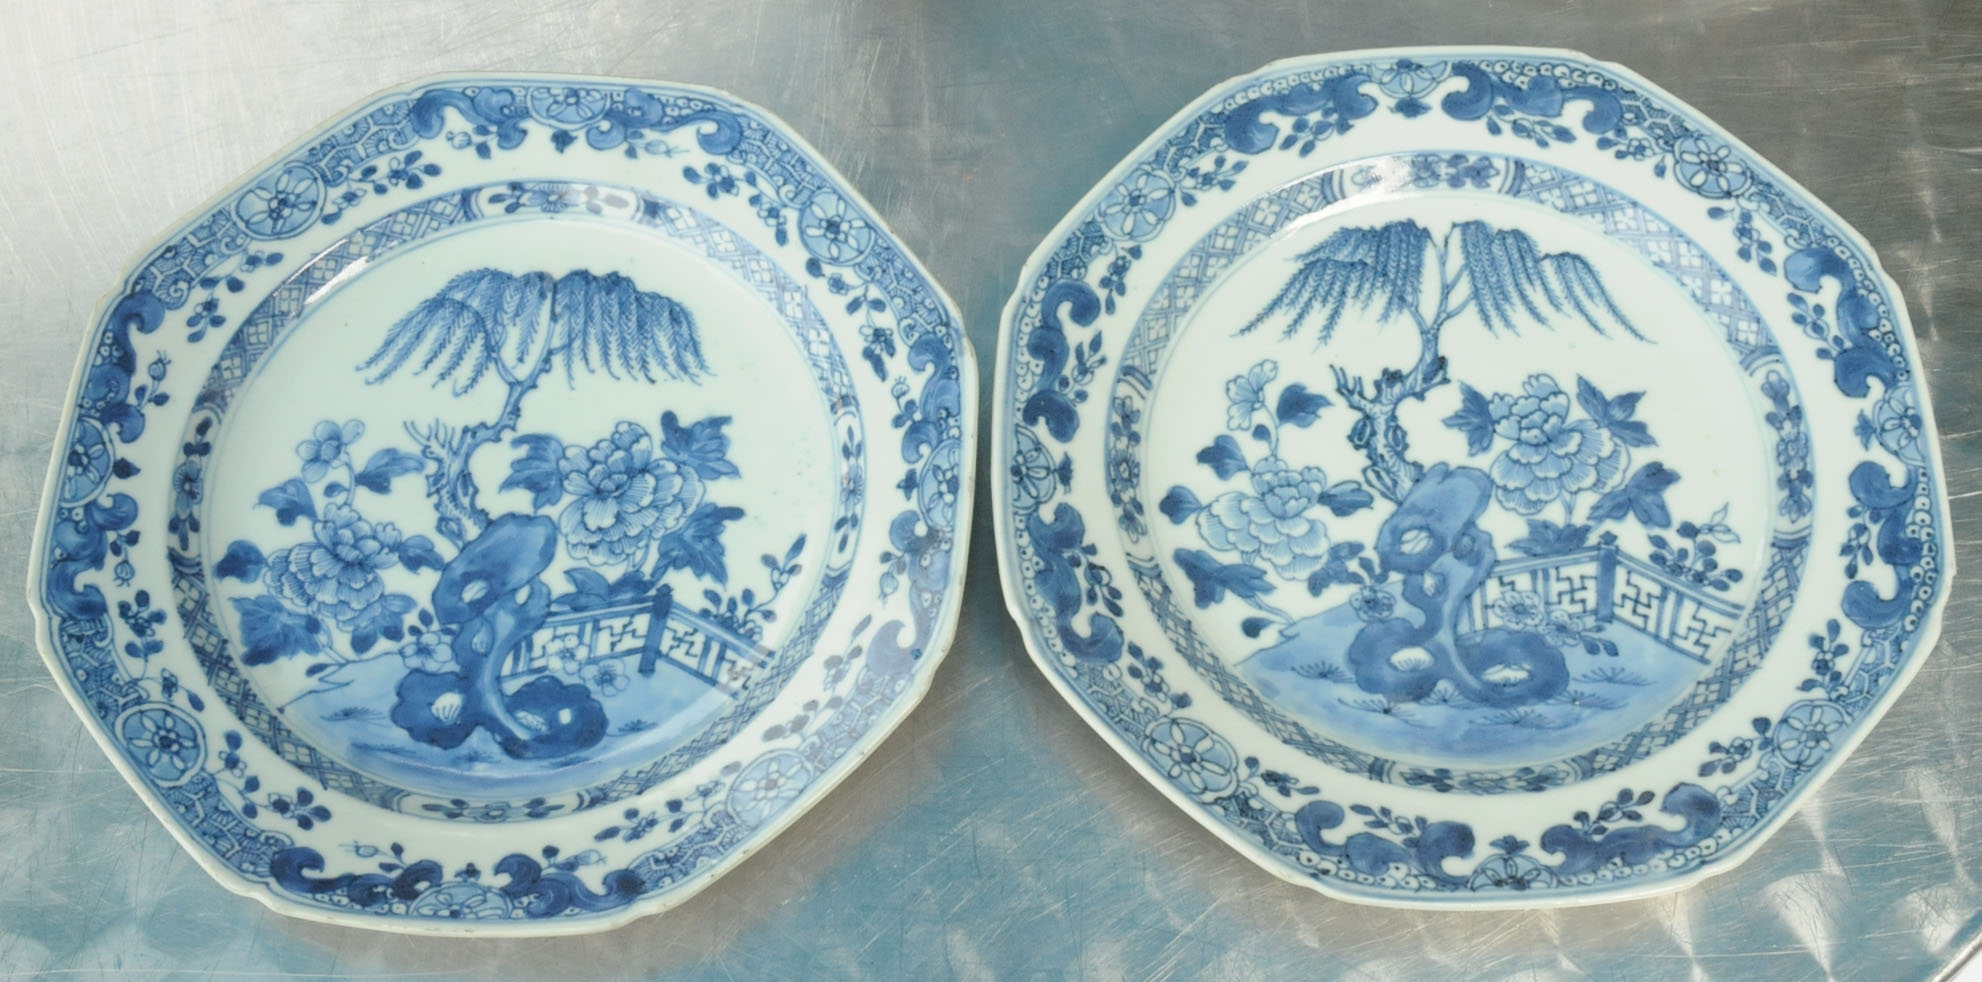 Four late 18th/early 19th century Chinese blue and white plates, with tree and fence patterns, - Image 2 of 8